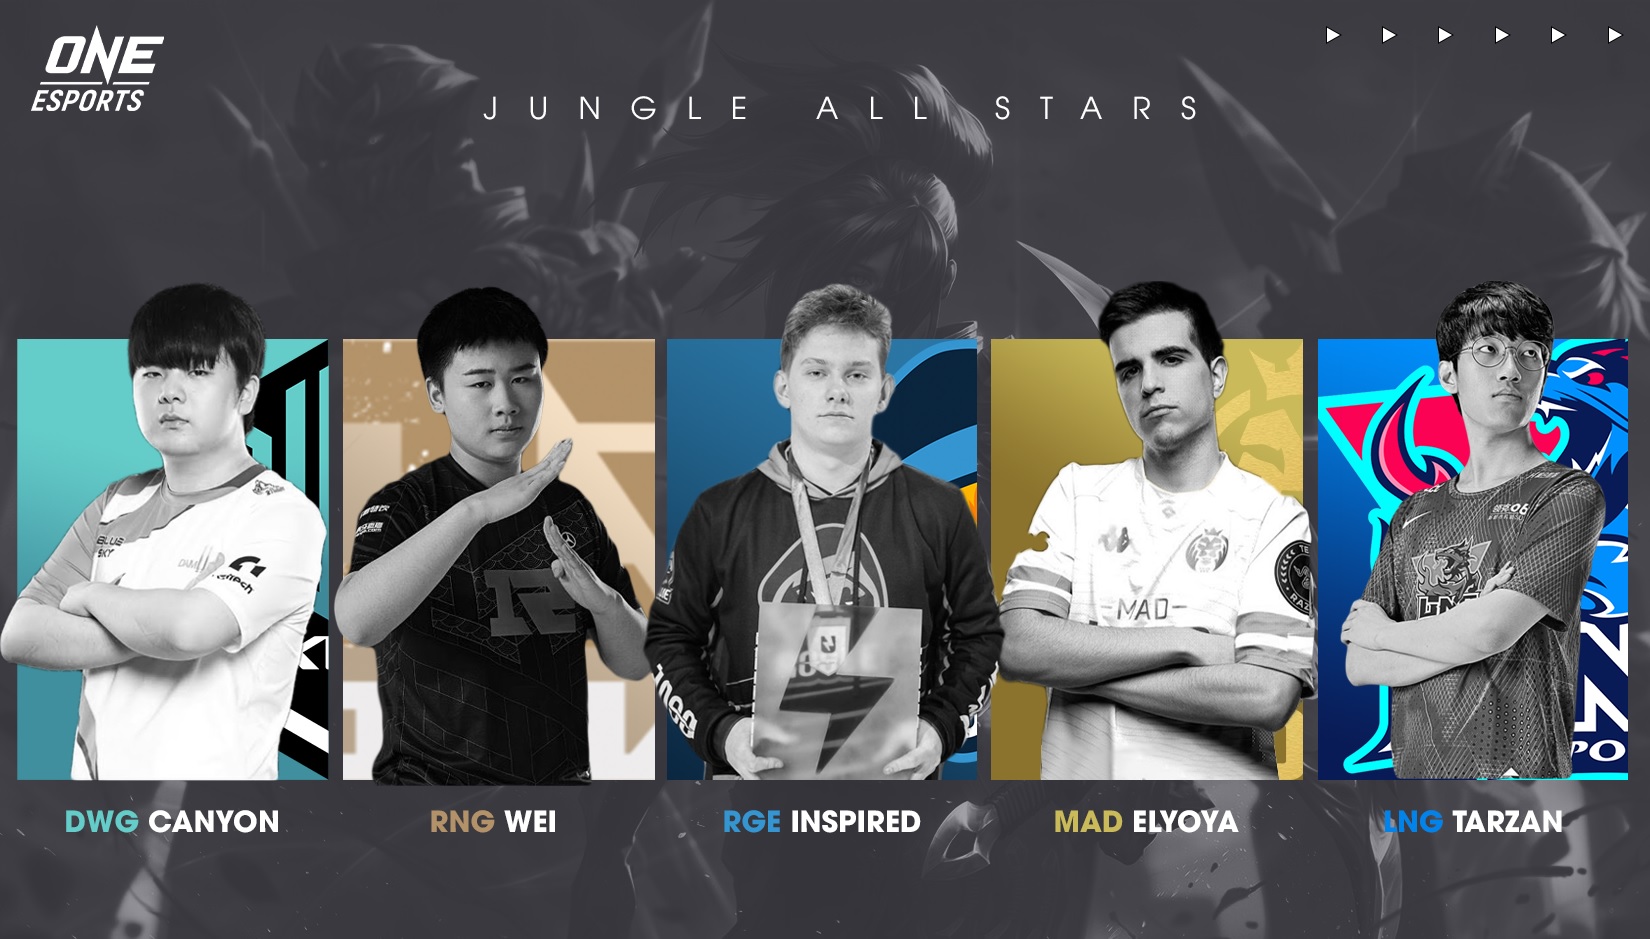 Moderar enchufe rosado The 5 best junglers to watch out for at Worlds 2021 | ONE Esports